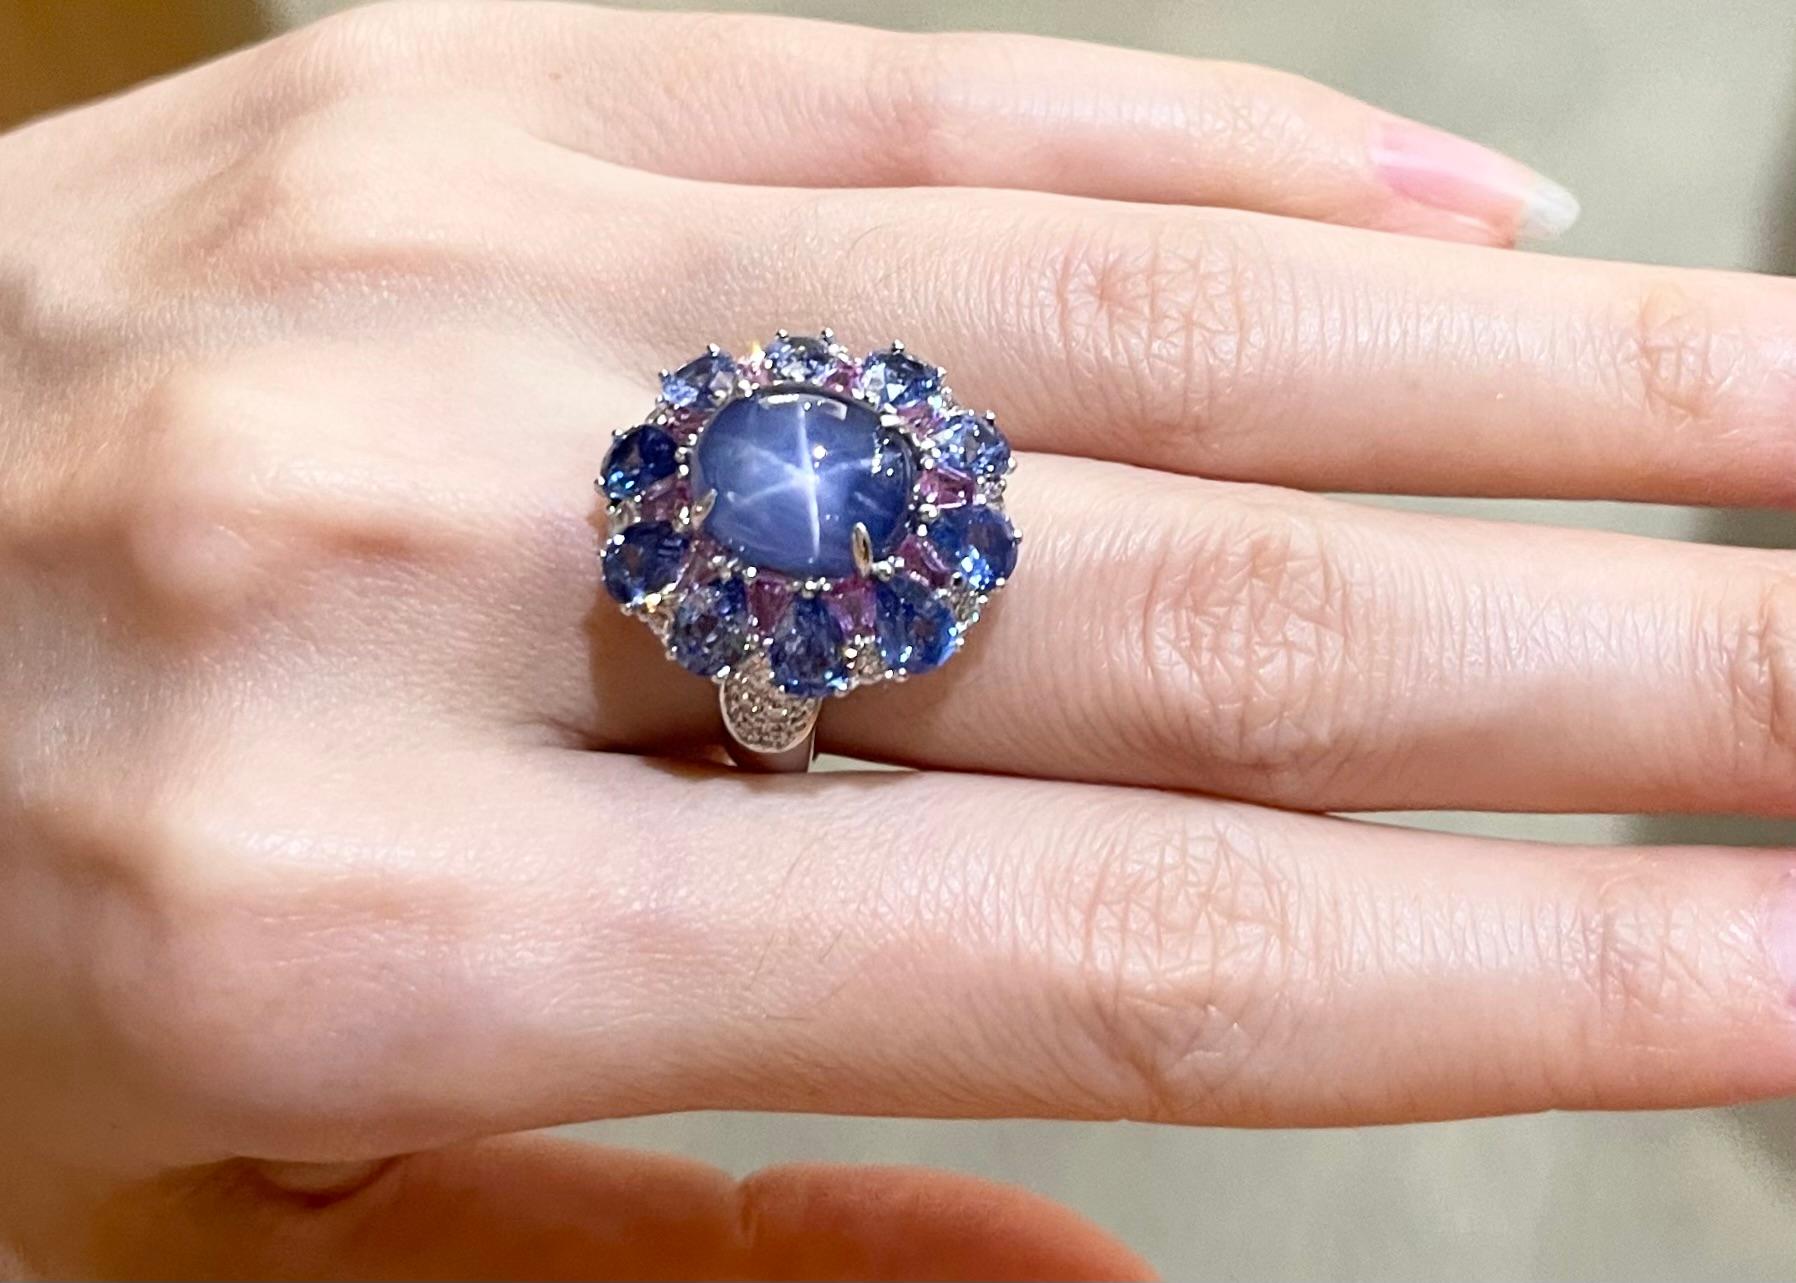 Blue Star Sapphire 10.68 carats, Blue Sapphire 4.06 carats, Pink Sapphire 2.0 carats and Diamond 0.74 carats Ring set in 18K White Gold Settings

Width:  2.0 cm 
Length: 2.2 cm
Ring Size: 54
Total Weight: 10.13 grams

